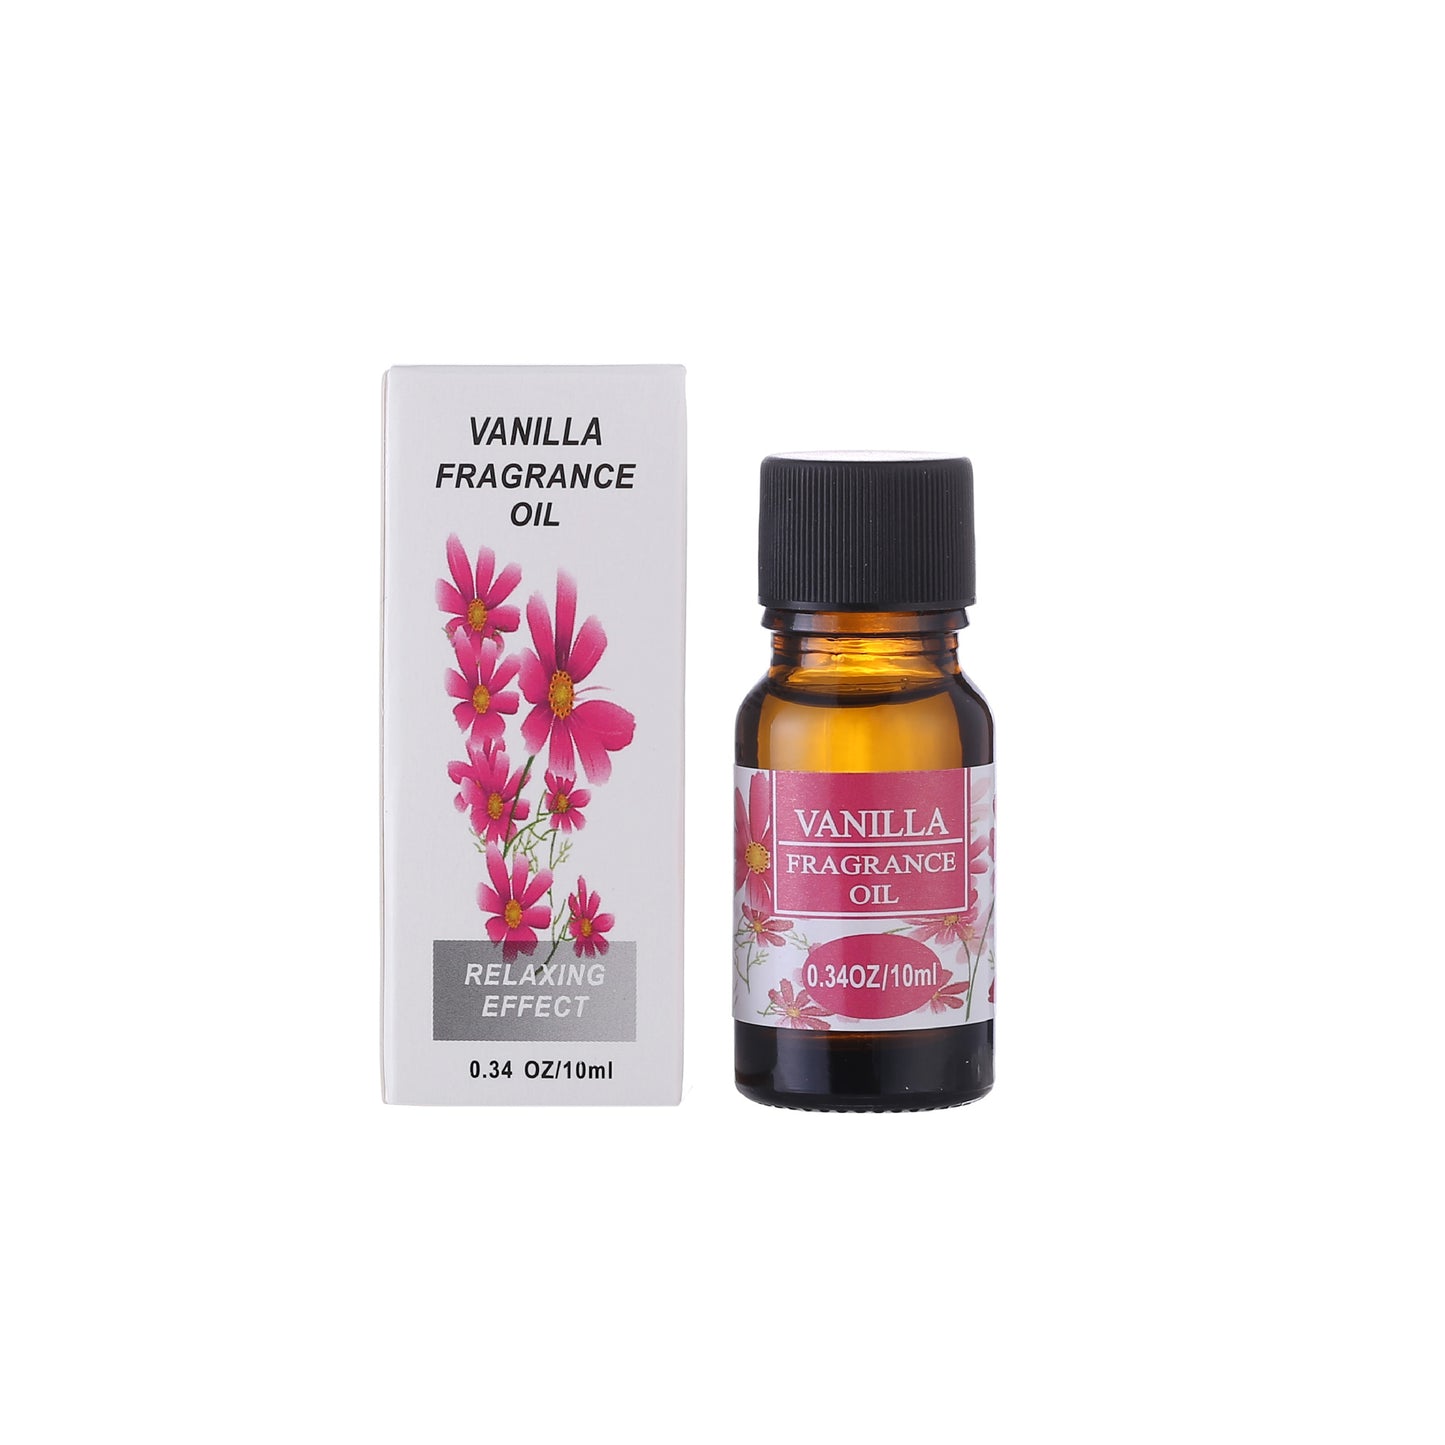 SerenityScent Aromatherapy Essential Oil Collection